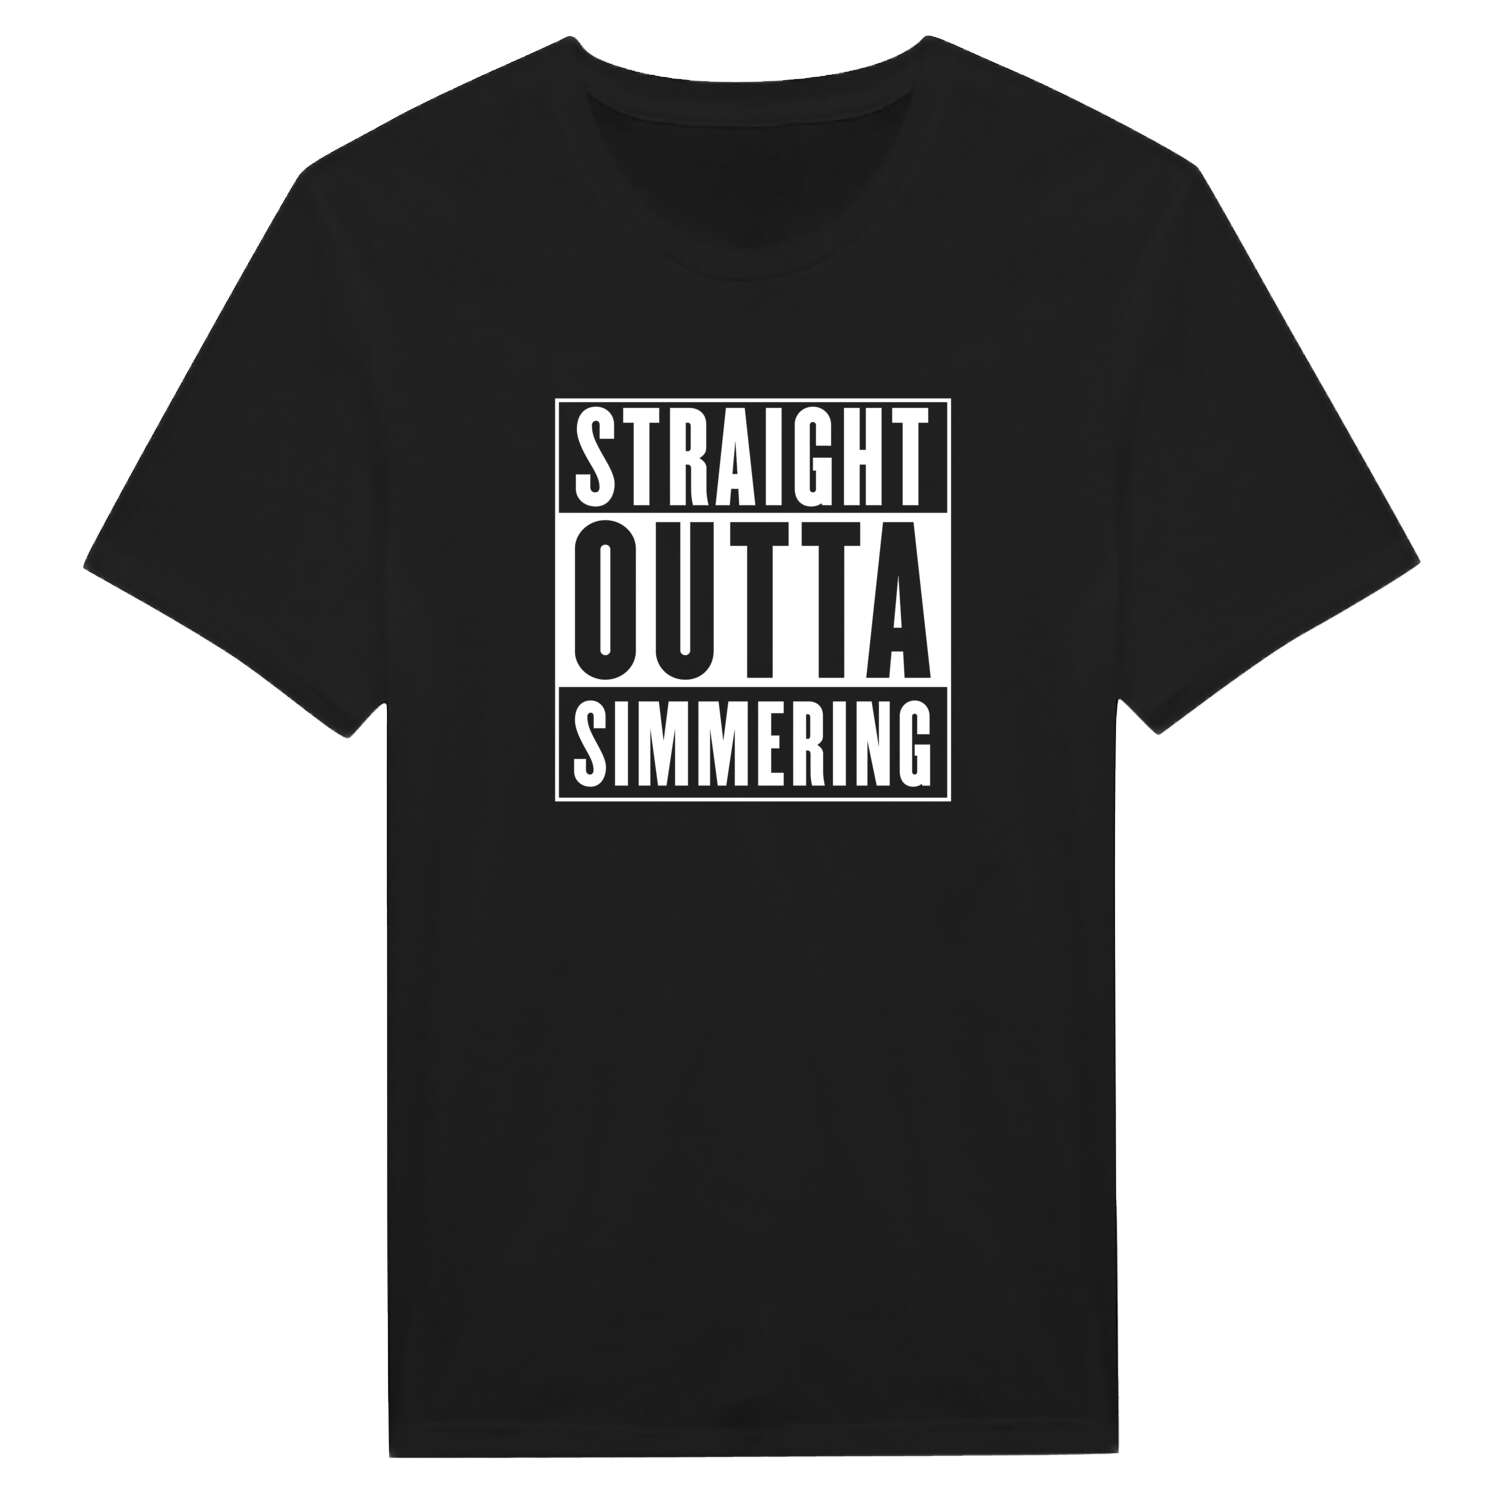 Simmering T-Shirt »Straight Outta«